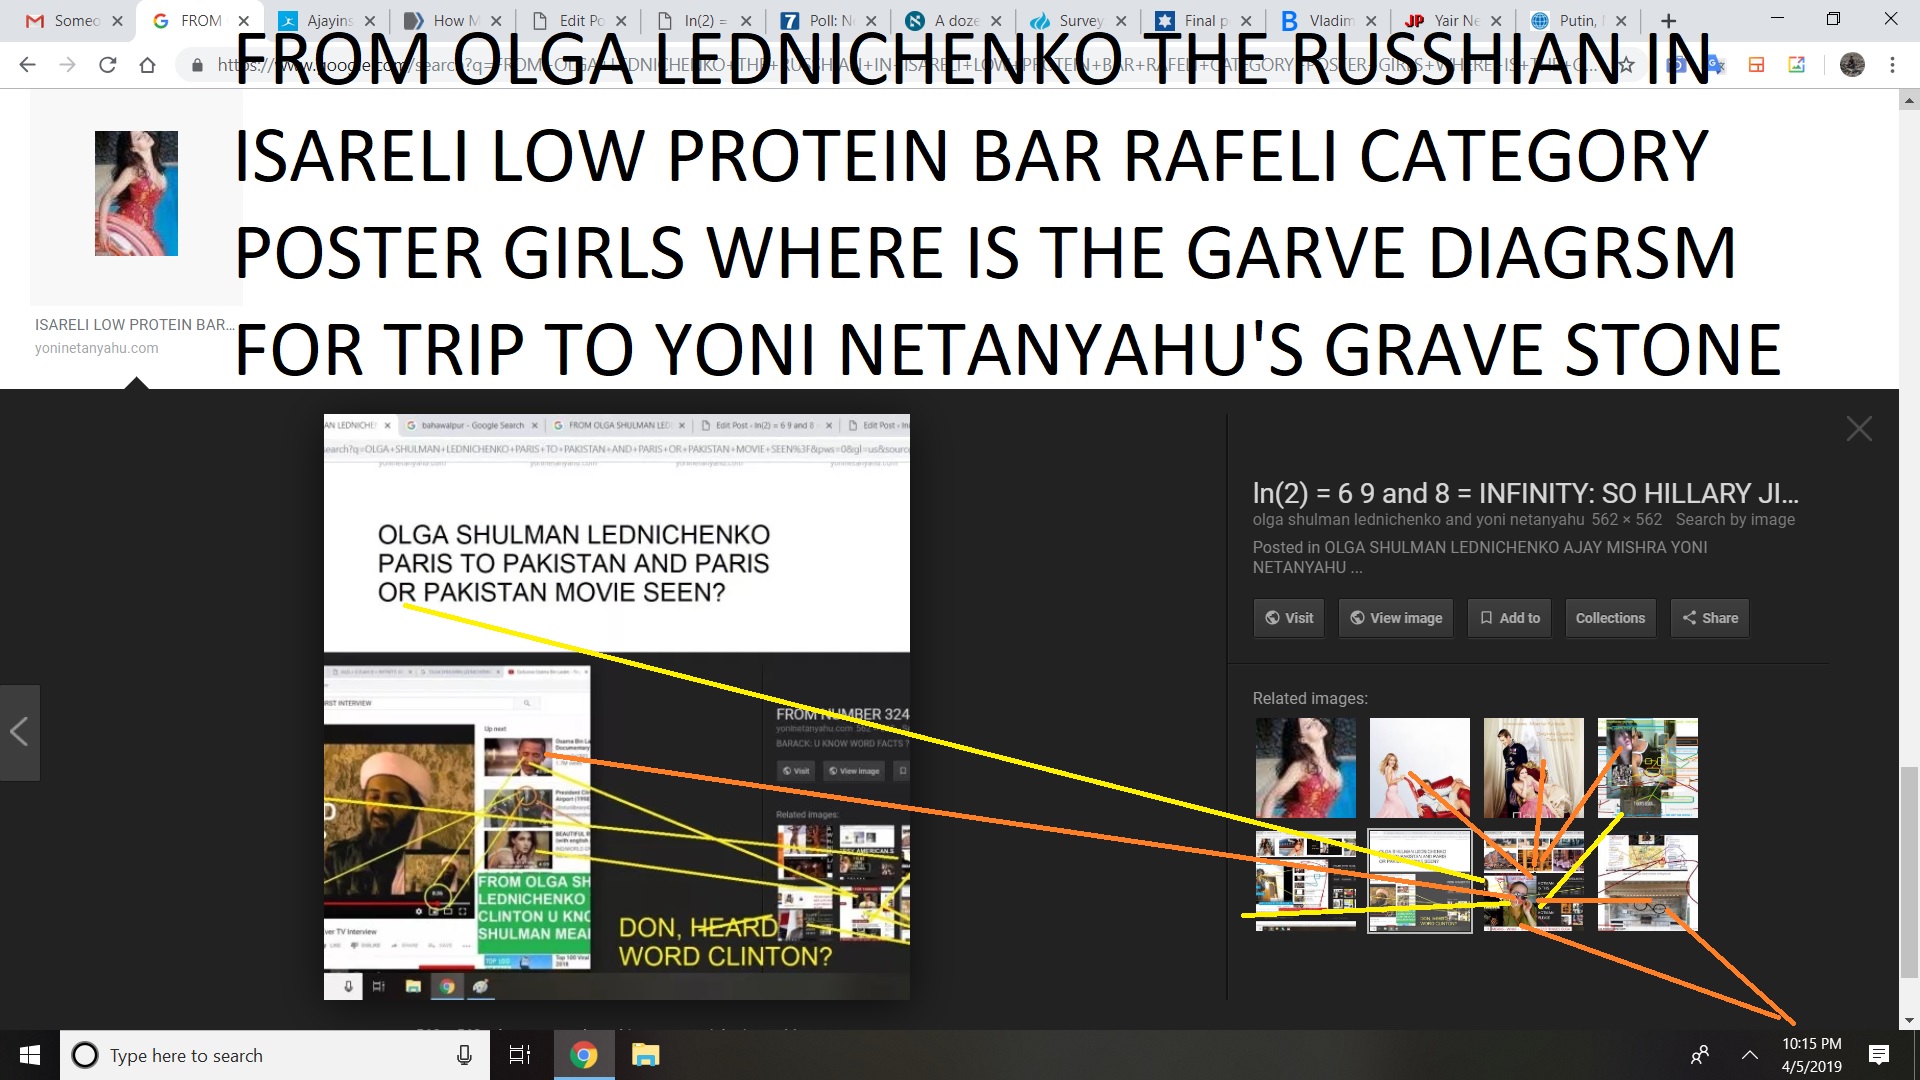 FROM OLGA LEDNICHENKO THE RUSSHIAN IN ISARELI LOW PROTEIN BAR RAFELI CATEGORY POSTER GIRLS WHERE IS THE GARVE DIAGRSM FOR TRIP TO YONI NETANYAHU'S GRAVE STONE